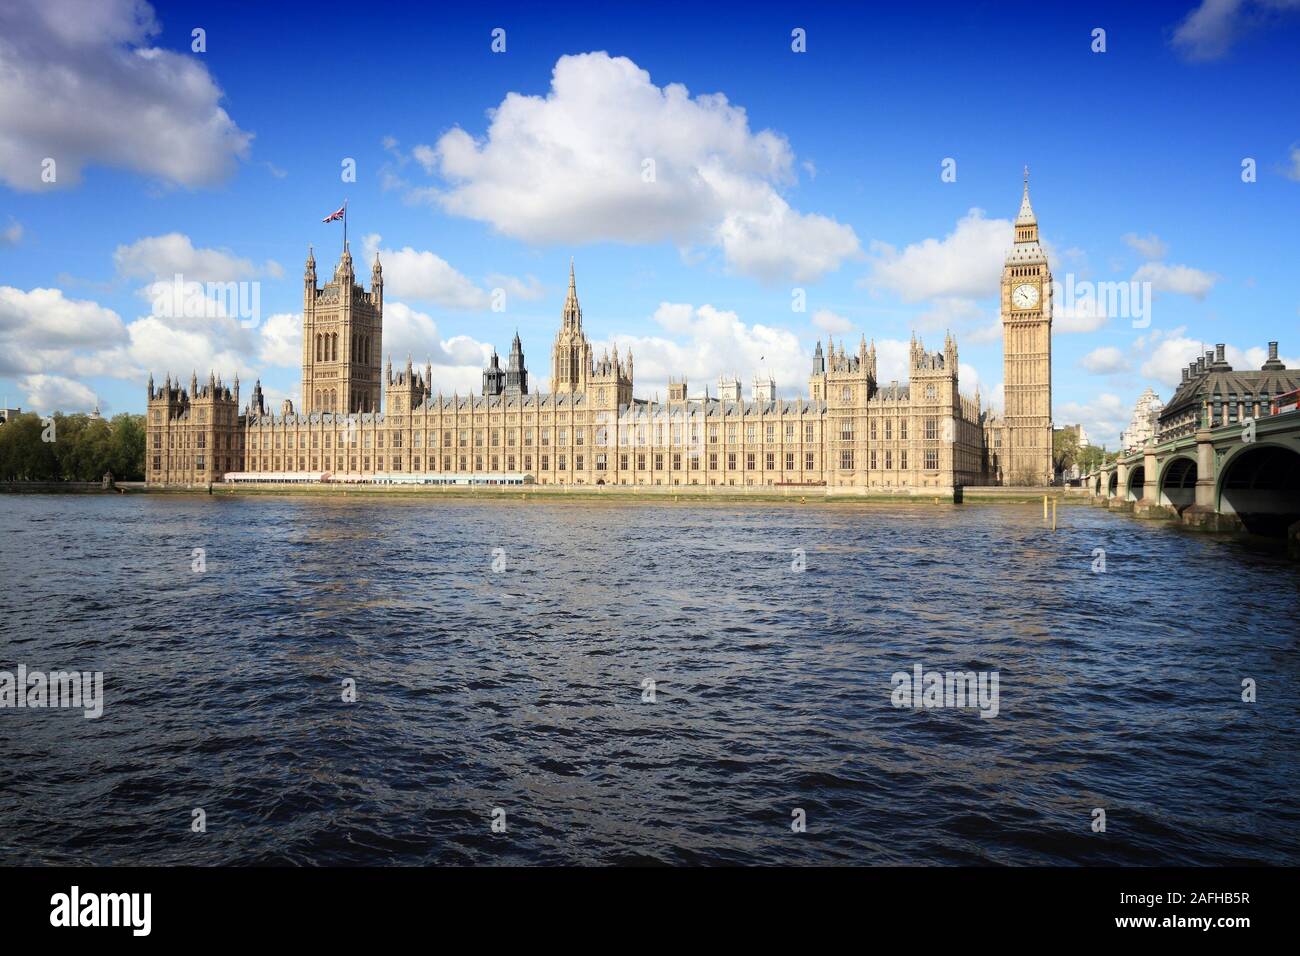 London UK - Palace of Westminster (Houses of Parliament). UNESCO World Heritage Site. Stock Photo